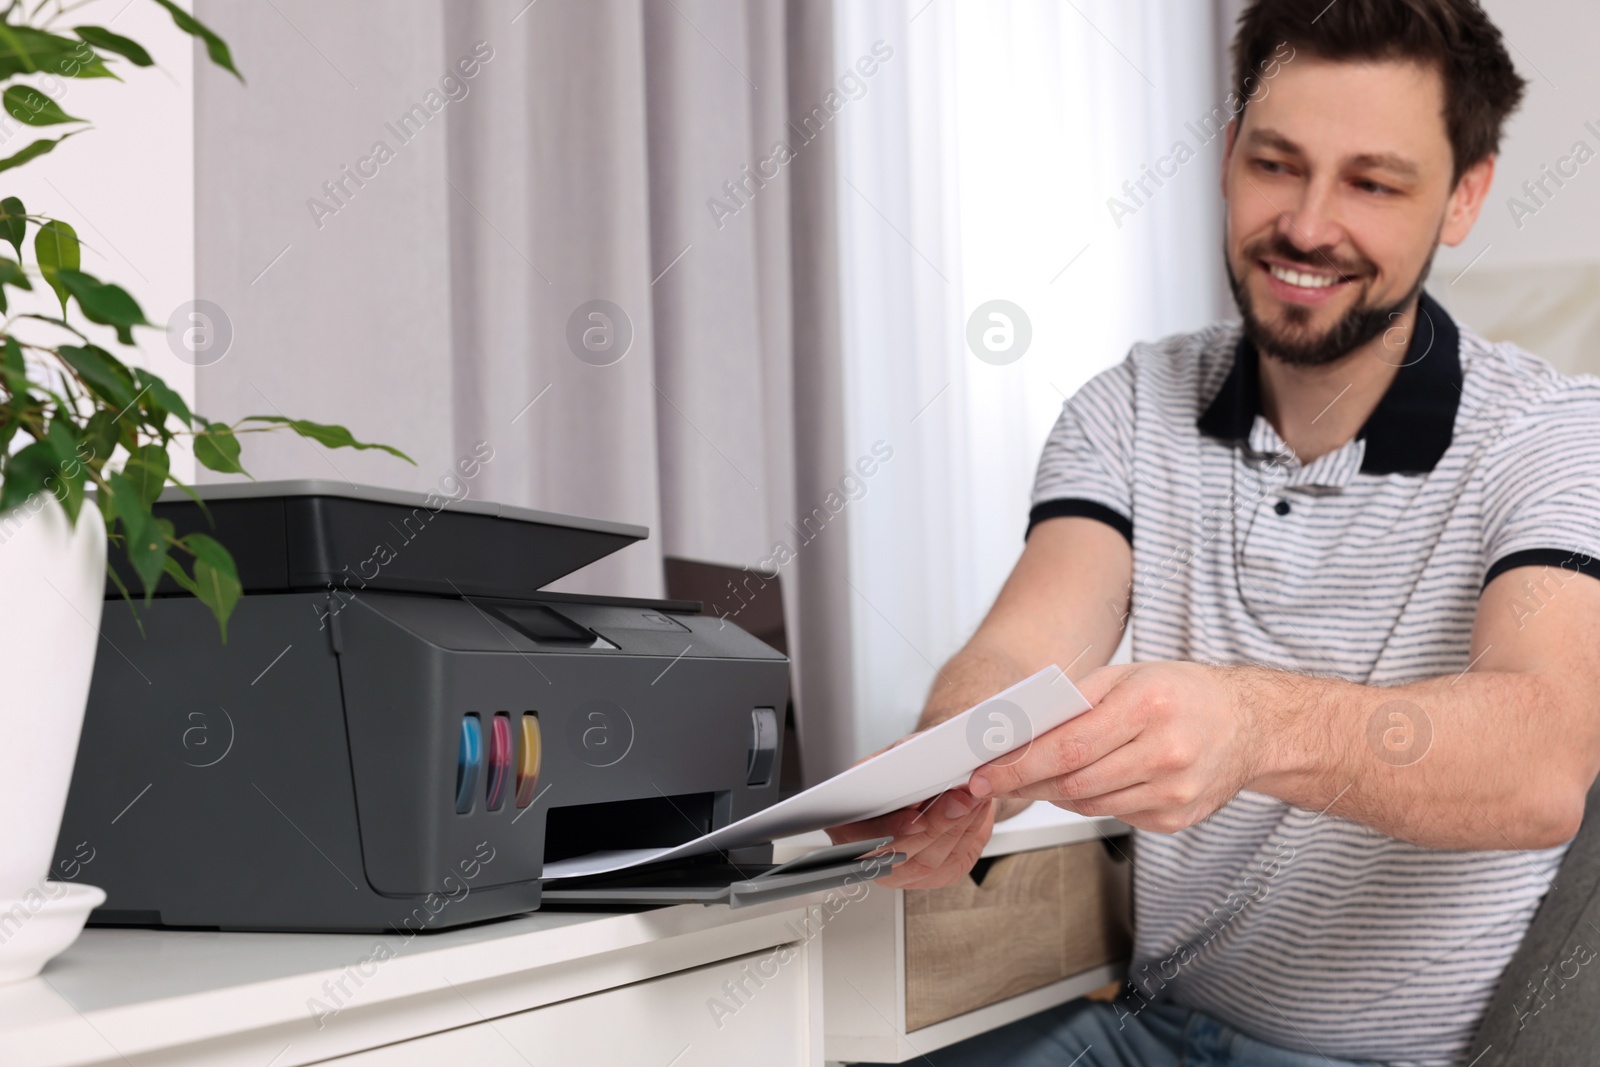 Photo of Man using modern printer at workplace indoors, selective focus